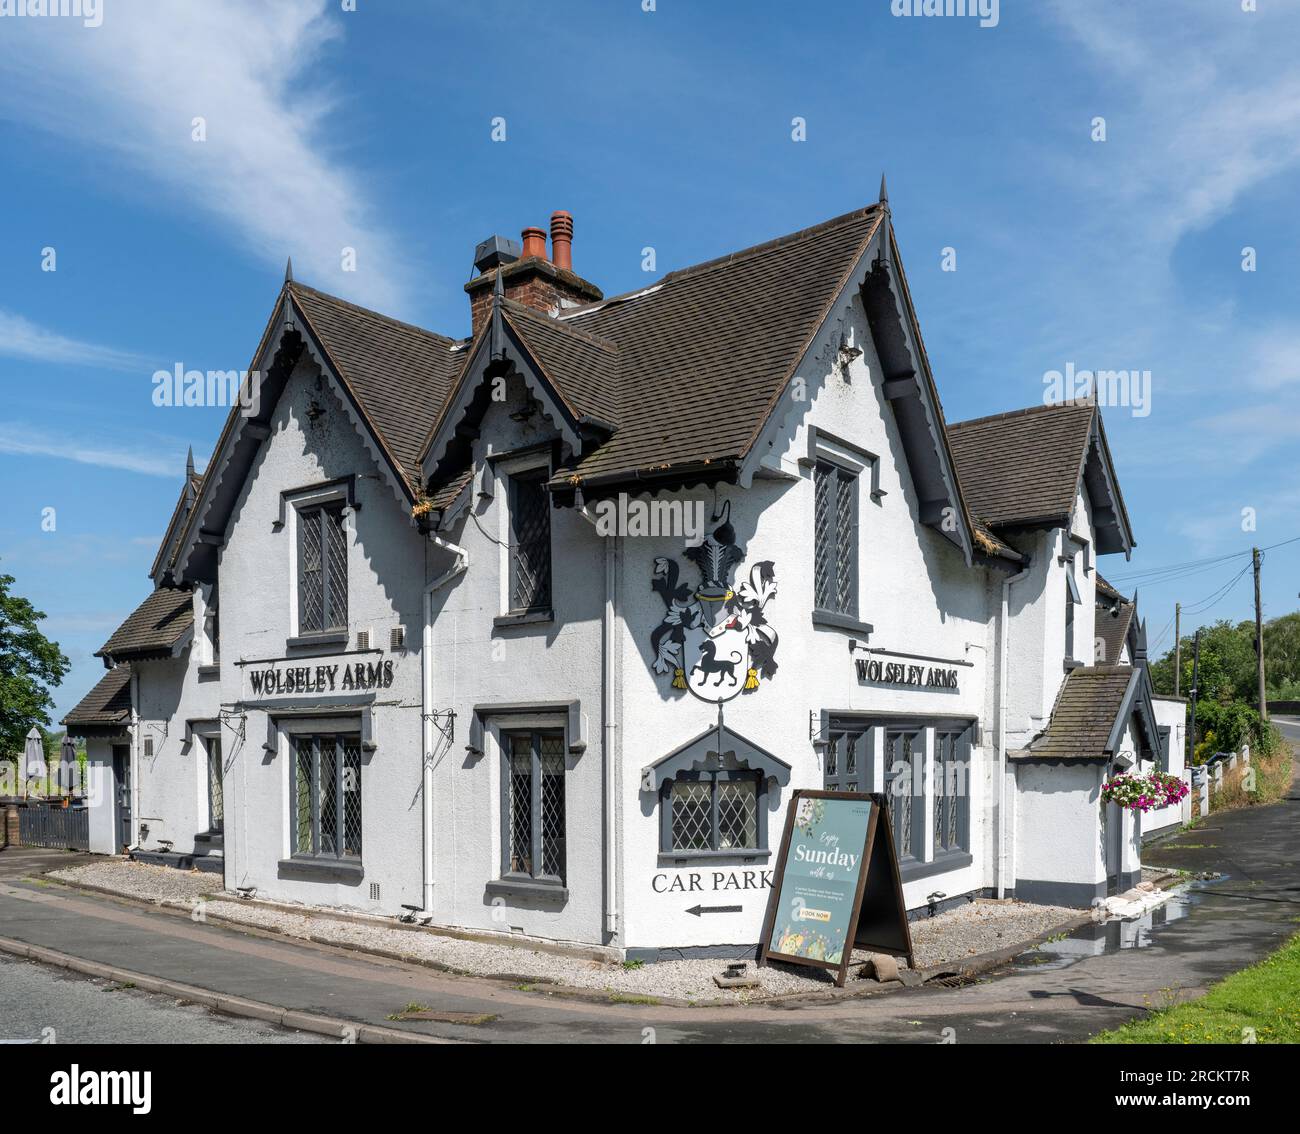 Wolseley Arms -a vintage inns public house - Wolseley Bridge, Stafford, Staffordshire, England, UK - a traditional country pub. Stock Photo